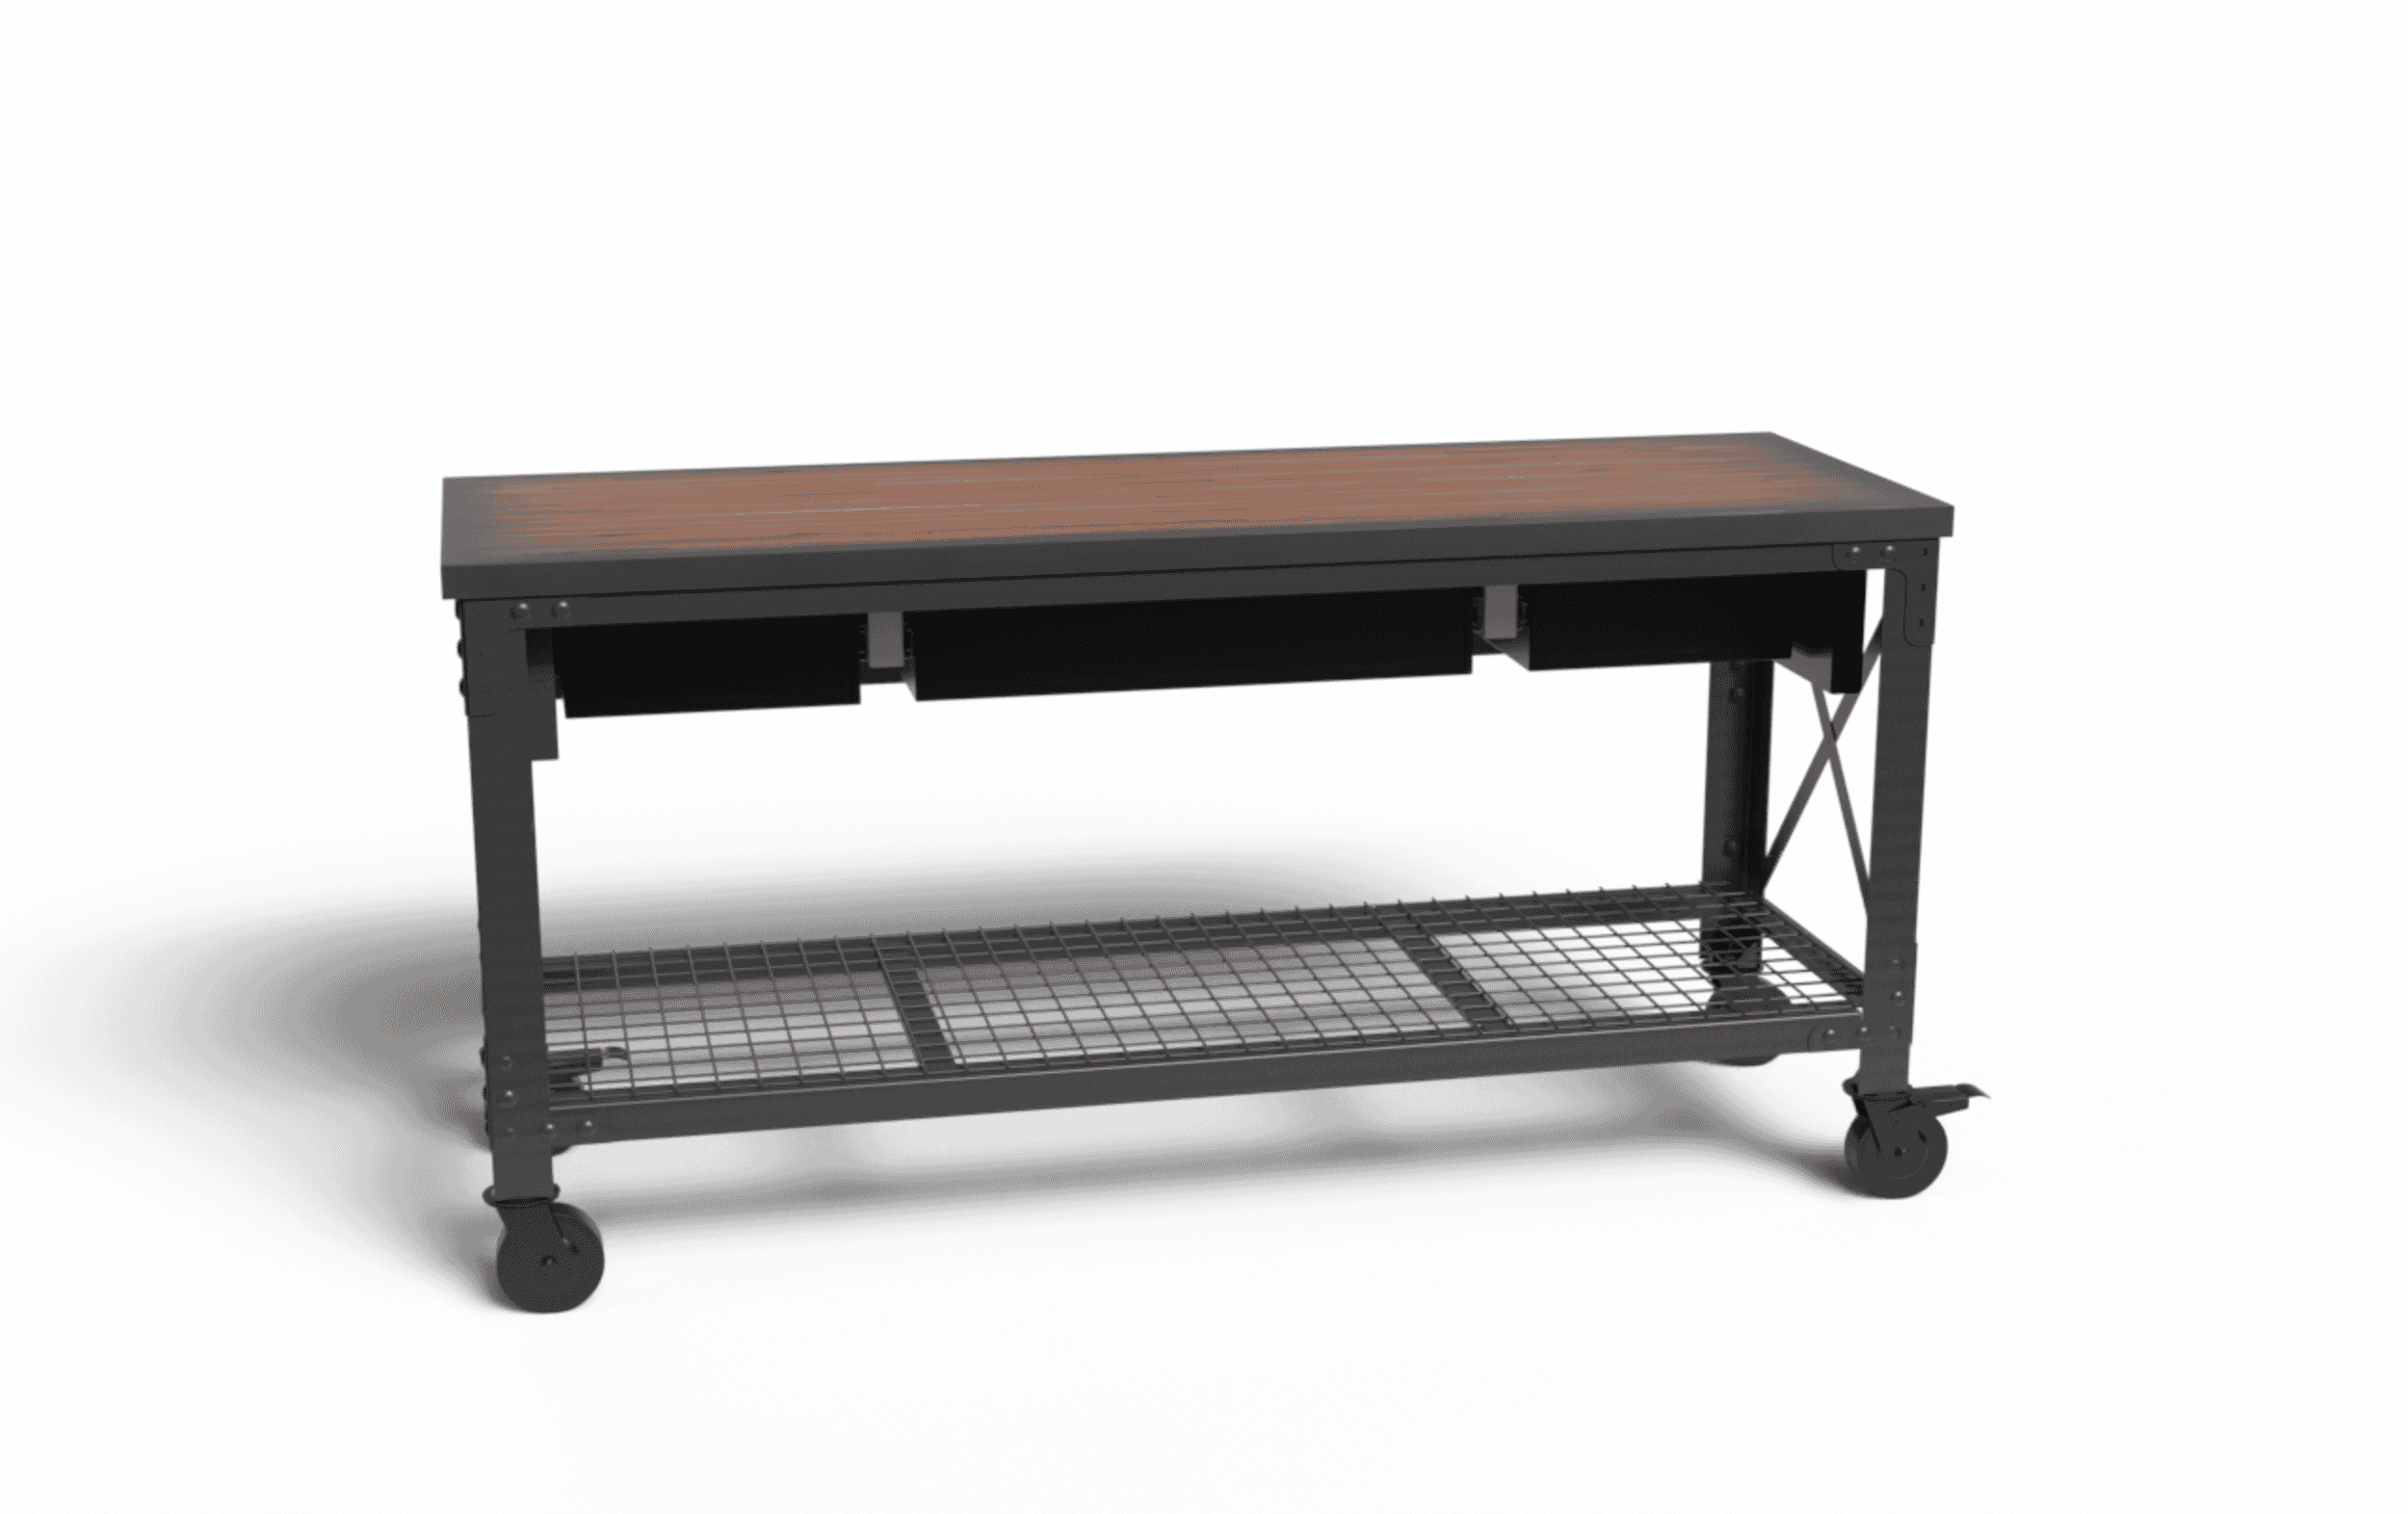 DuraMax Rolling Workbench Furniture 72 in. x 24 in. with 3 Drawers, for  Home, Garage, Workshop